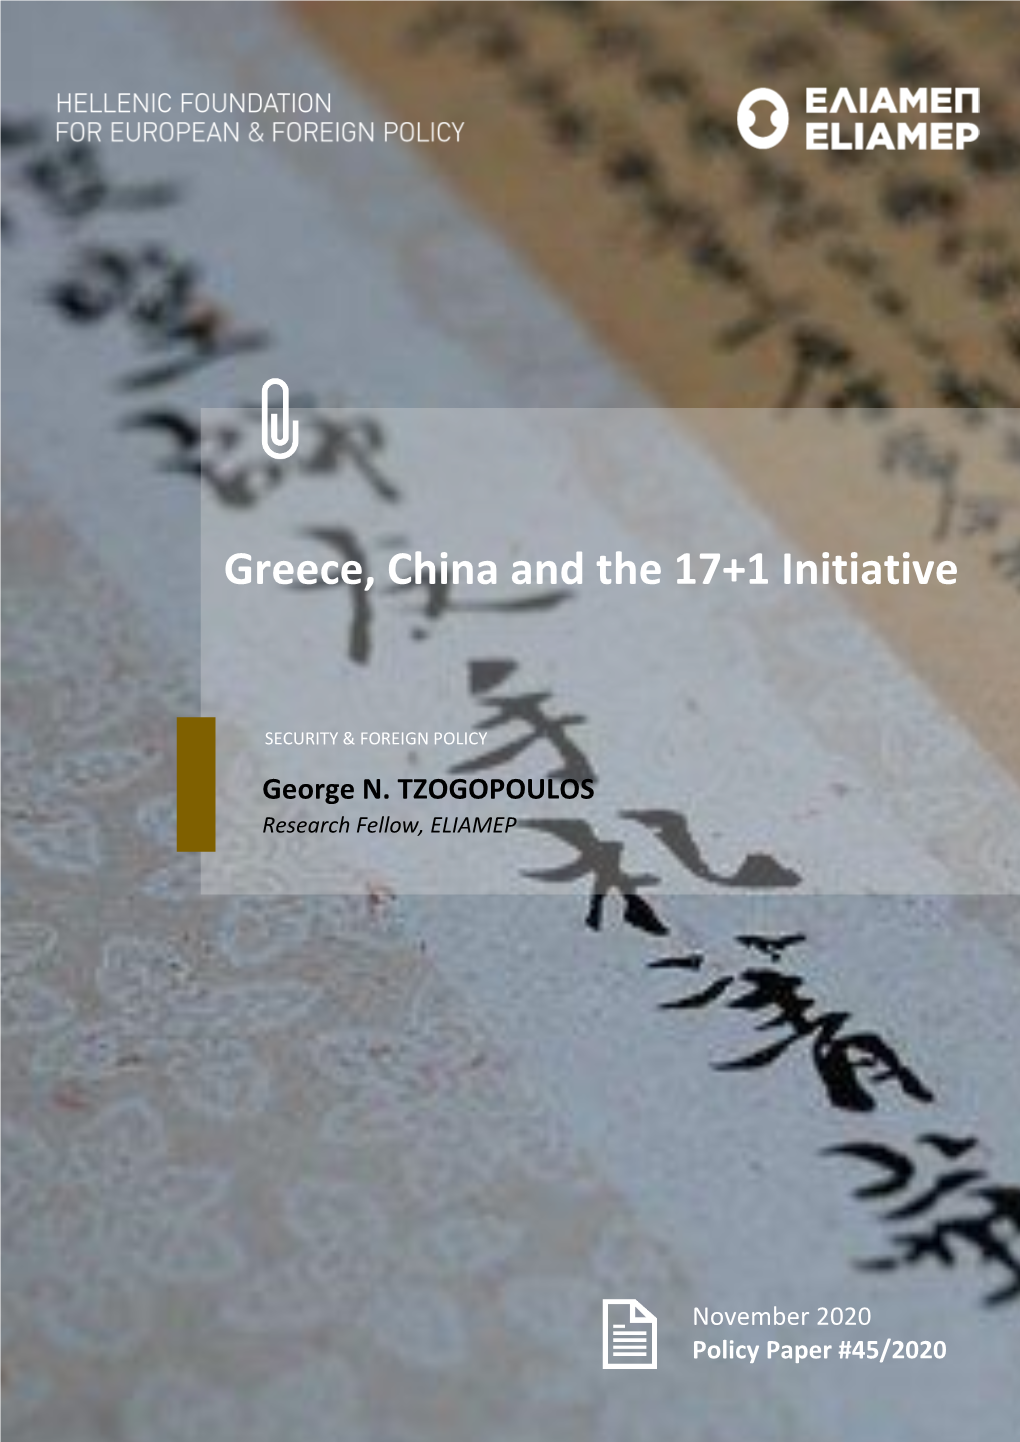 Greece, China and the 17+1 Initiative